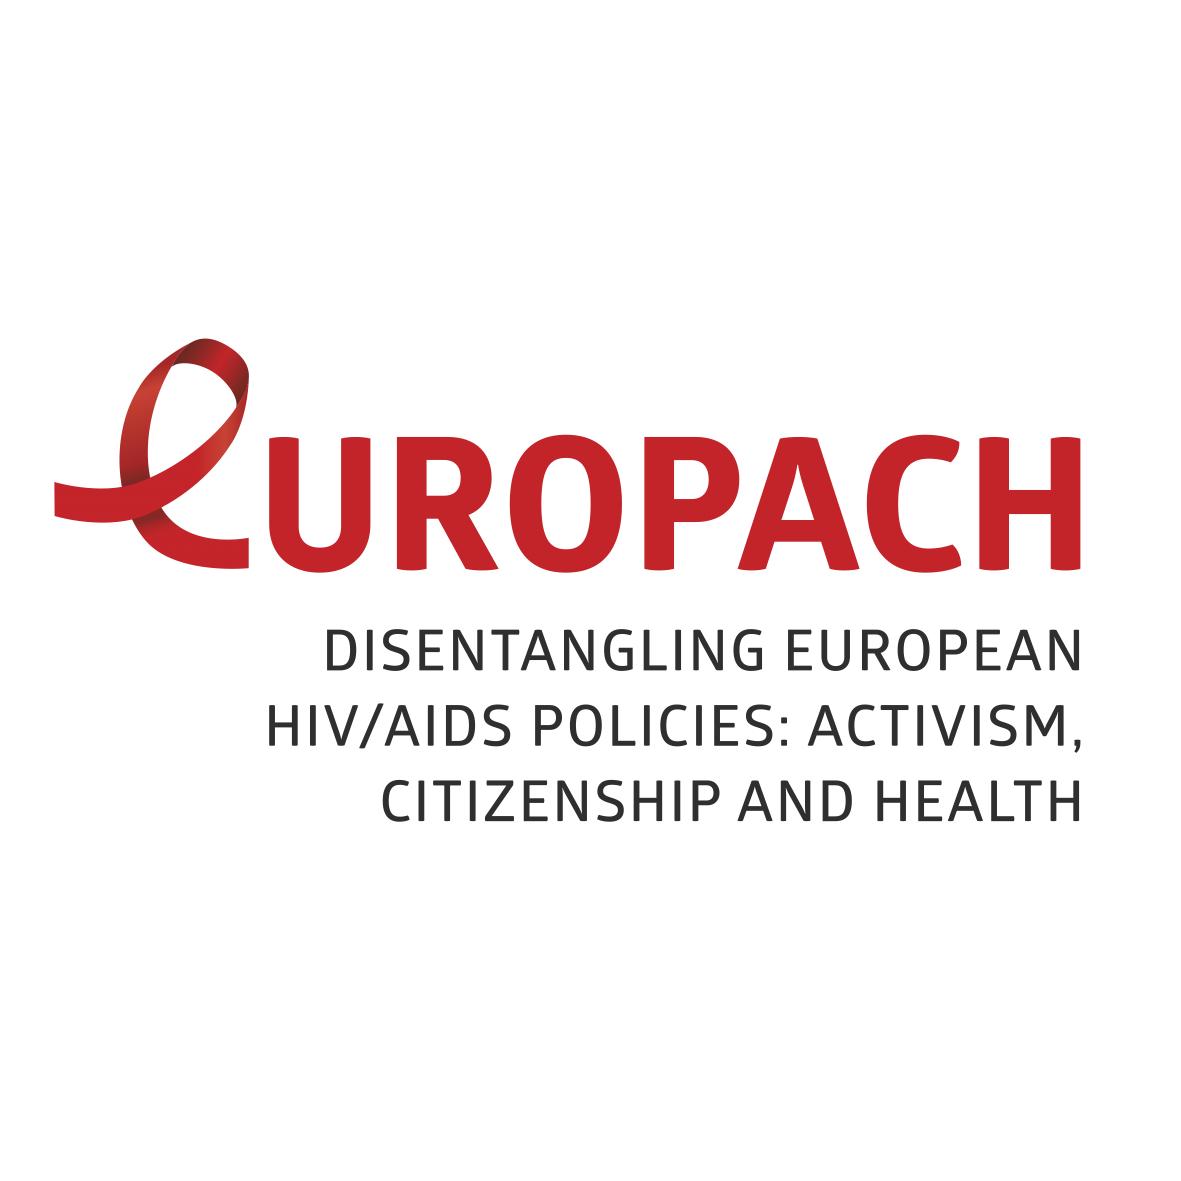 Disentangling European HIV/AIDS Policies: Activism, Citizenship and Health